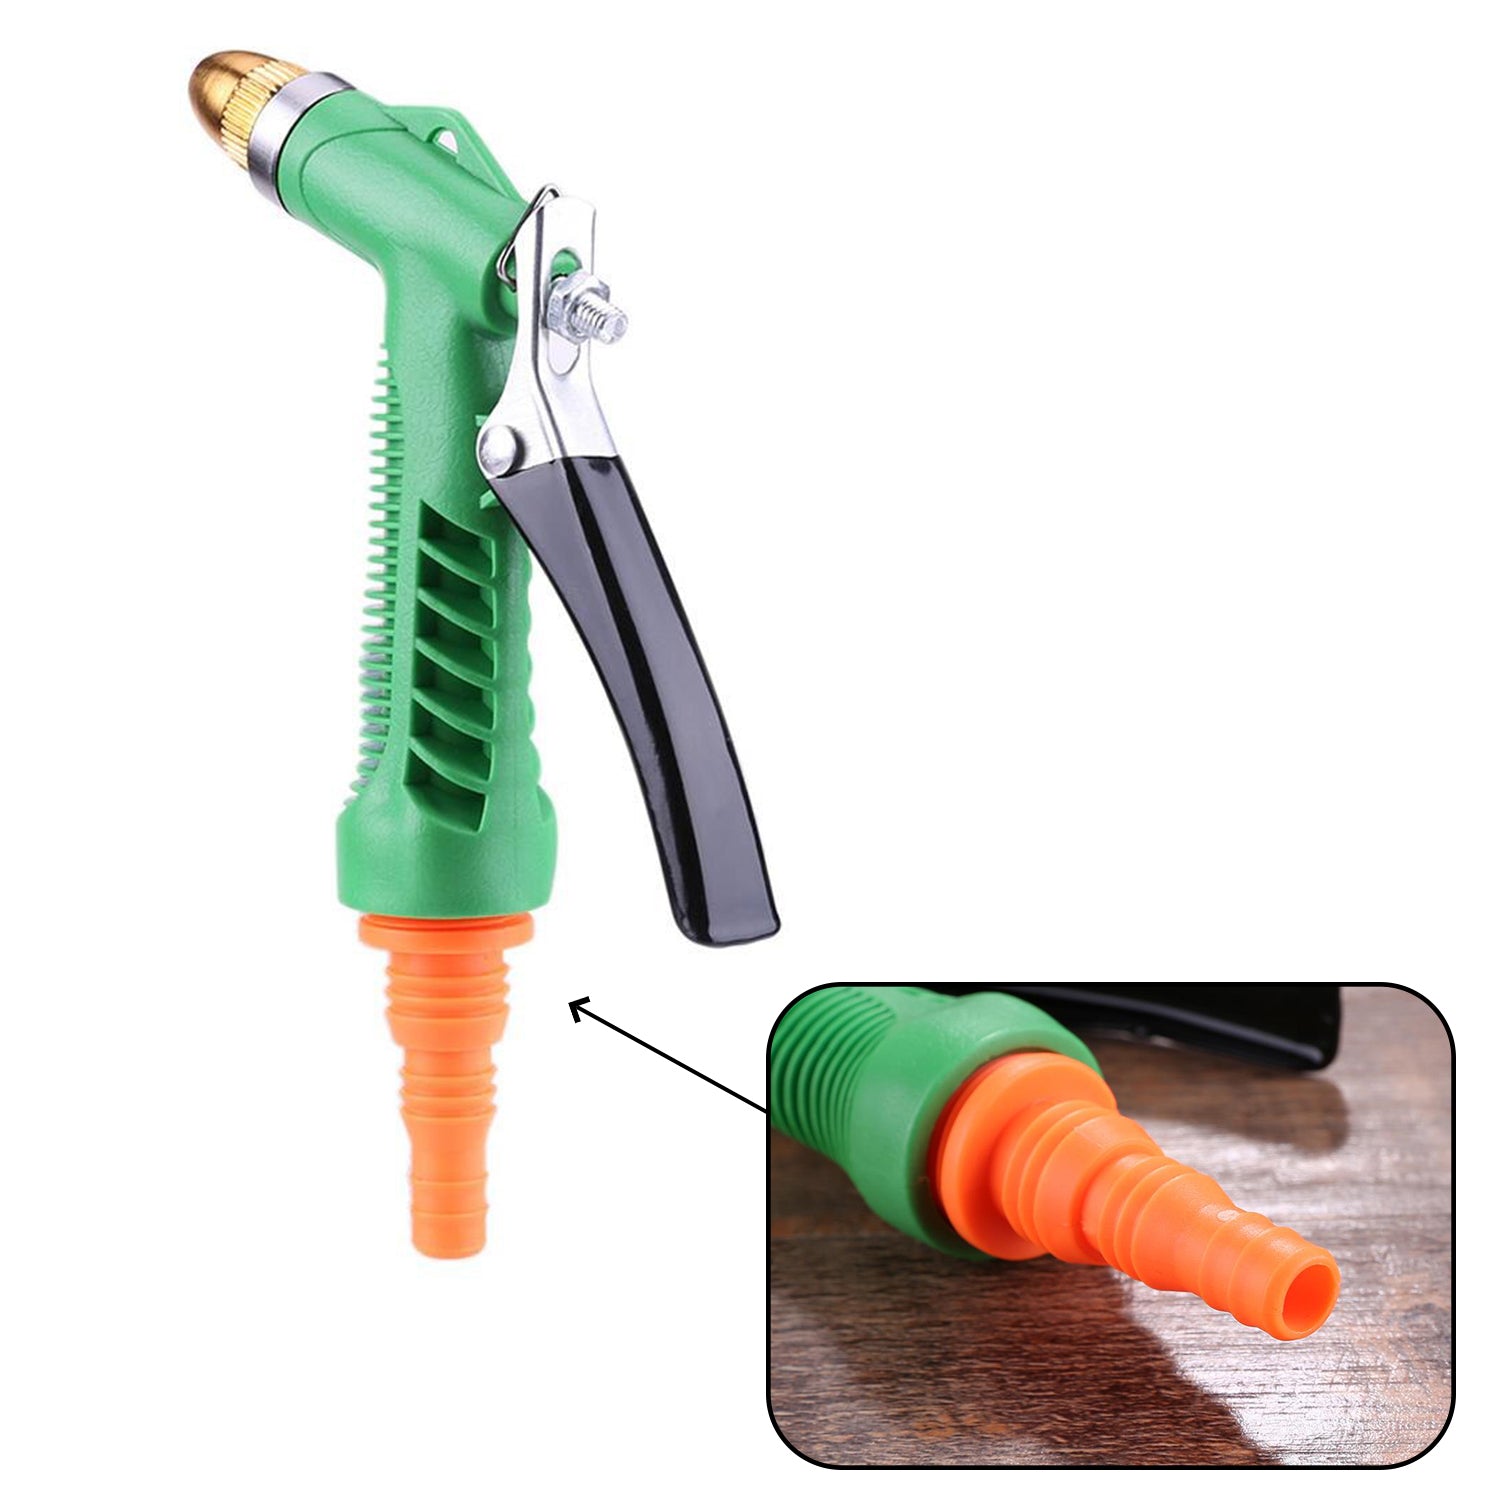 0590L Spray Gun For Watering And Sprinkling Purposes Over Plants And Trees In Parks And Types Of Garden Places Etc. DeoDap